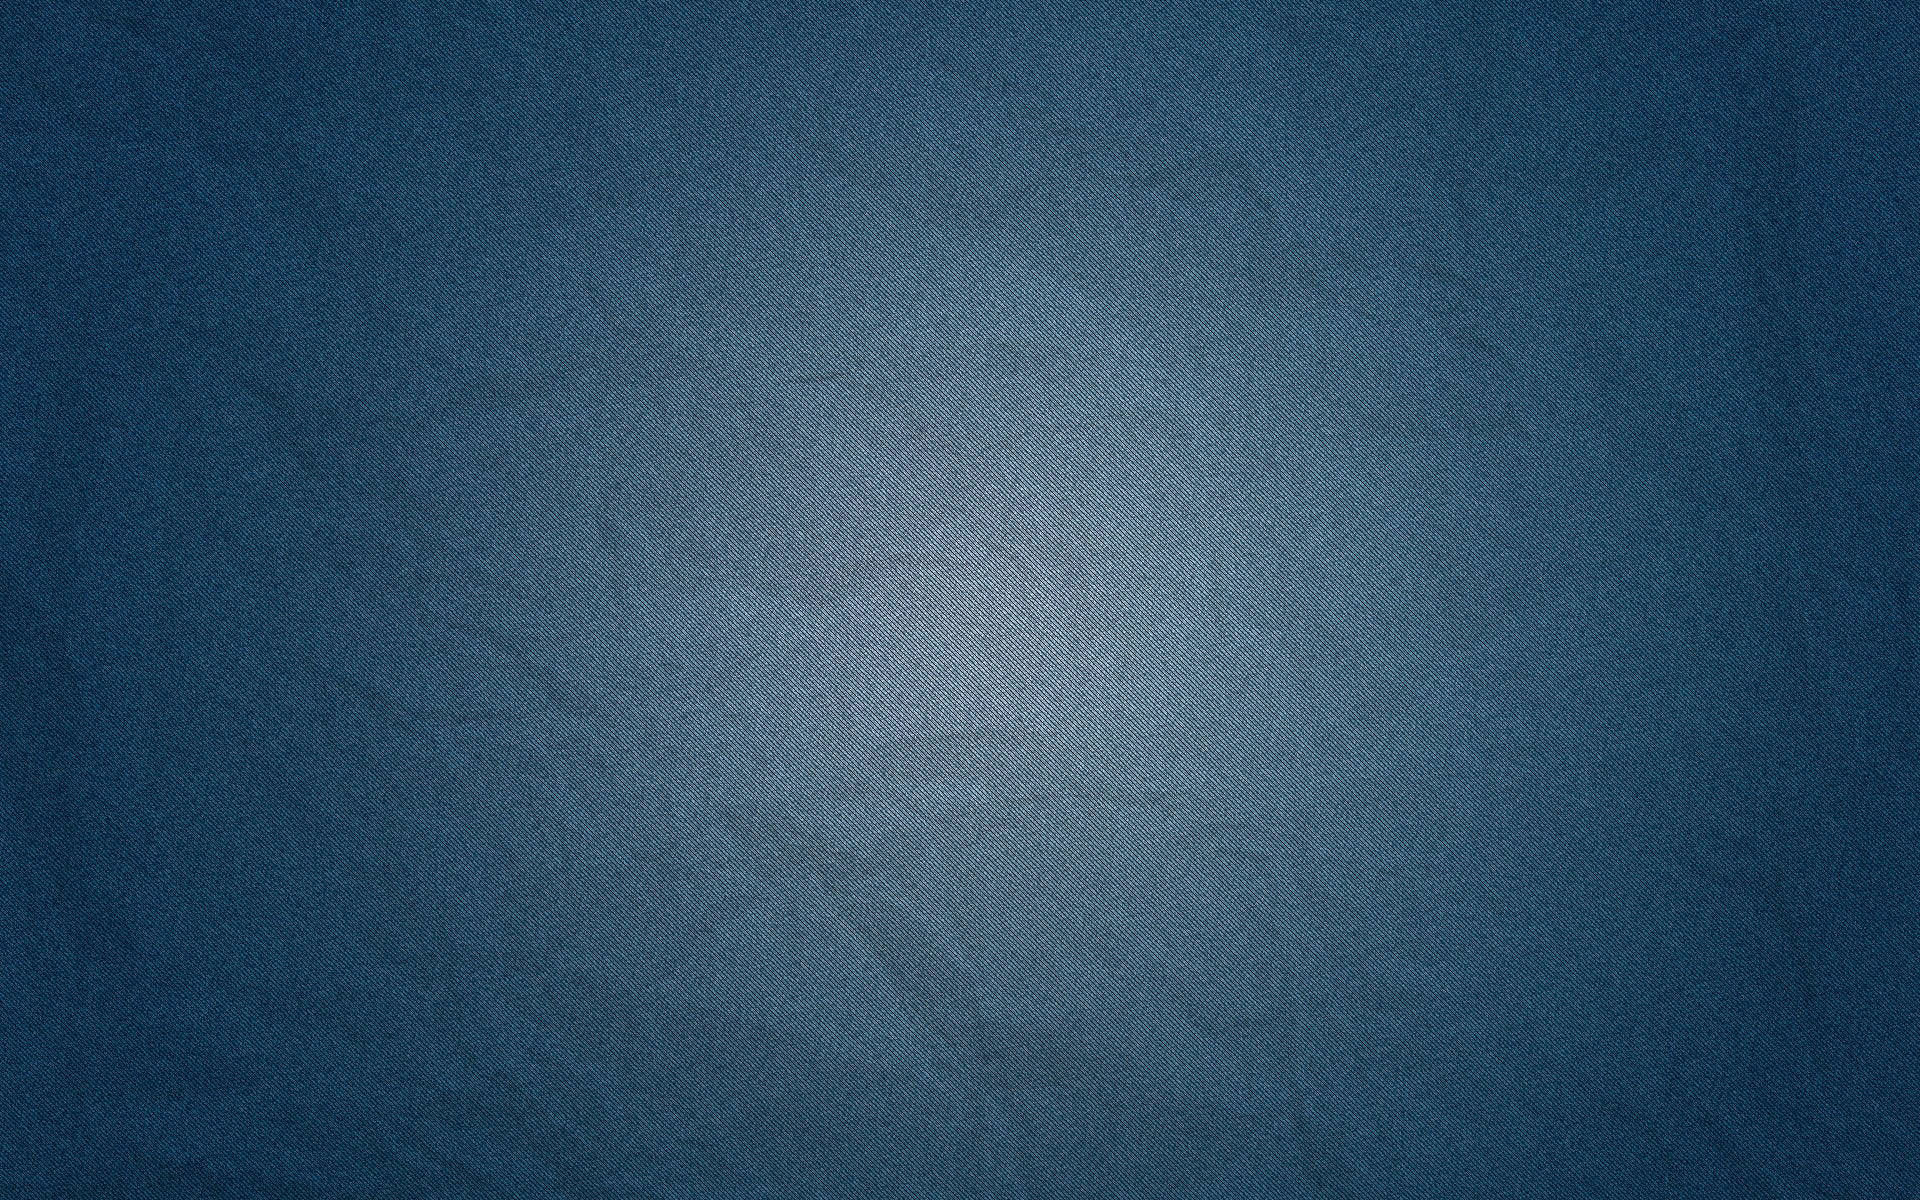 Textured Blue Gradient Backgrounds Background